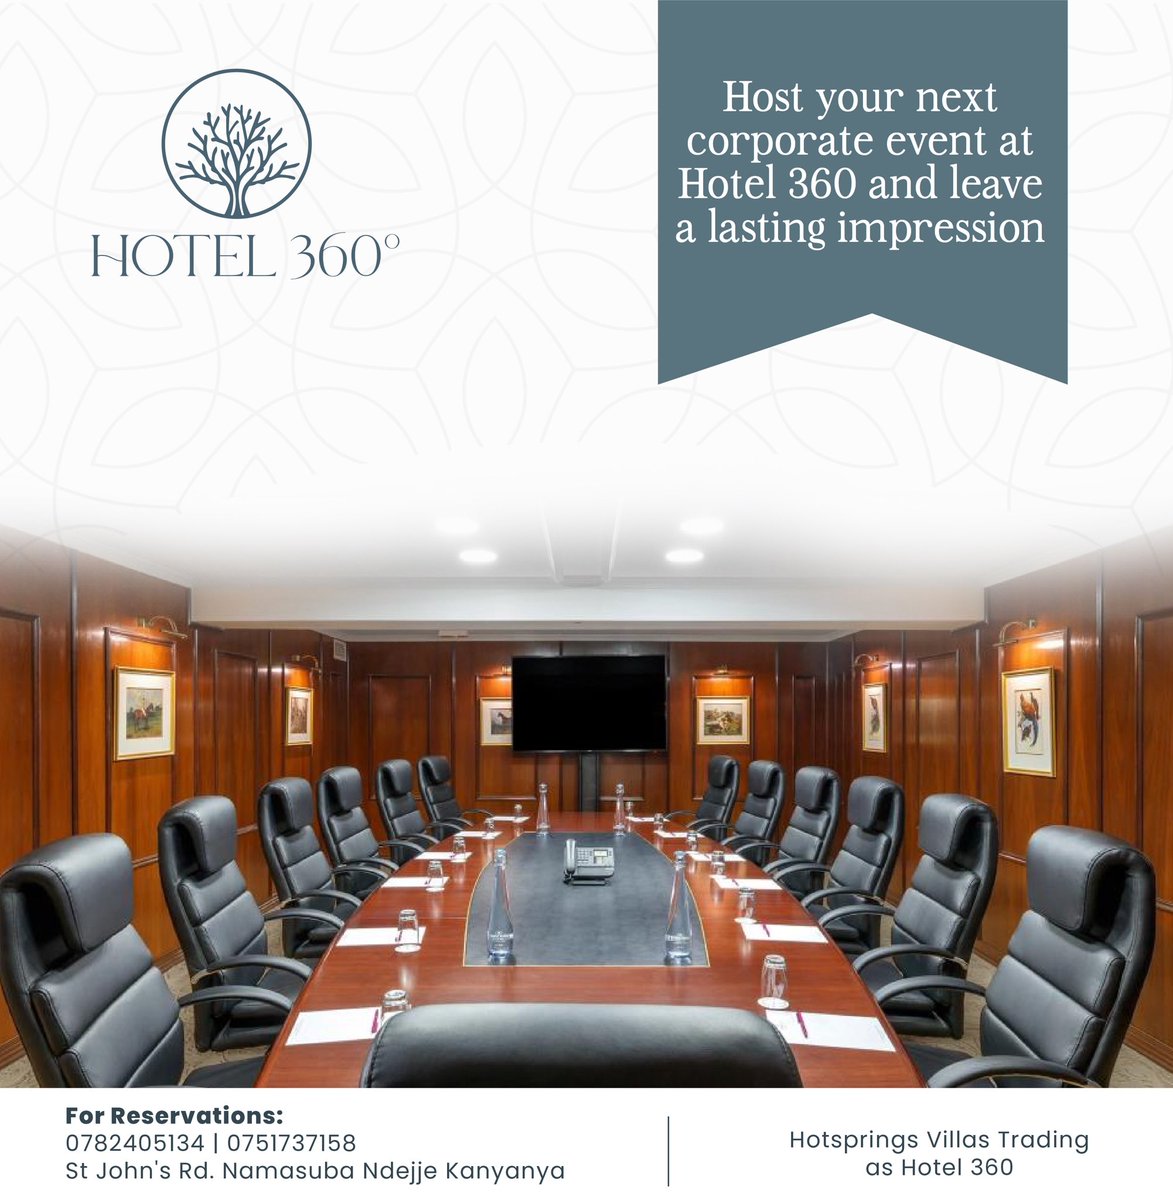 .@Hotel360Ug’s versatile event spaces are designed to accommodate gatherings of all sizes, from board meetings to company-wide conferences. Let us take care of the details while you focus on business   #BeyondTheStay #Hotel360